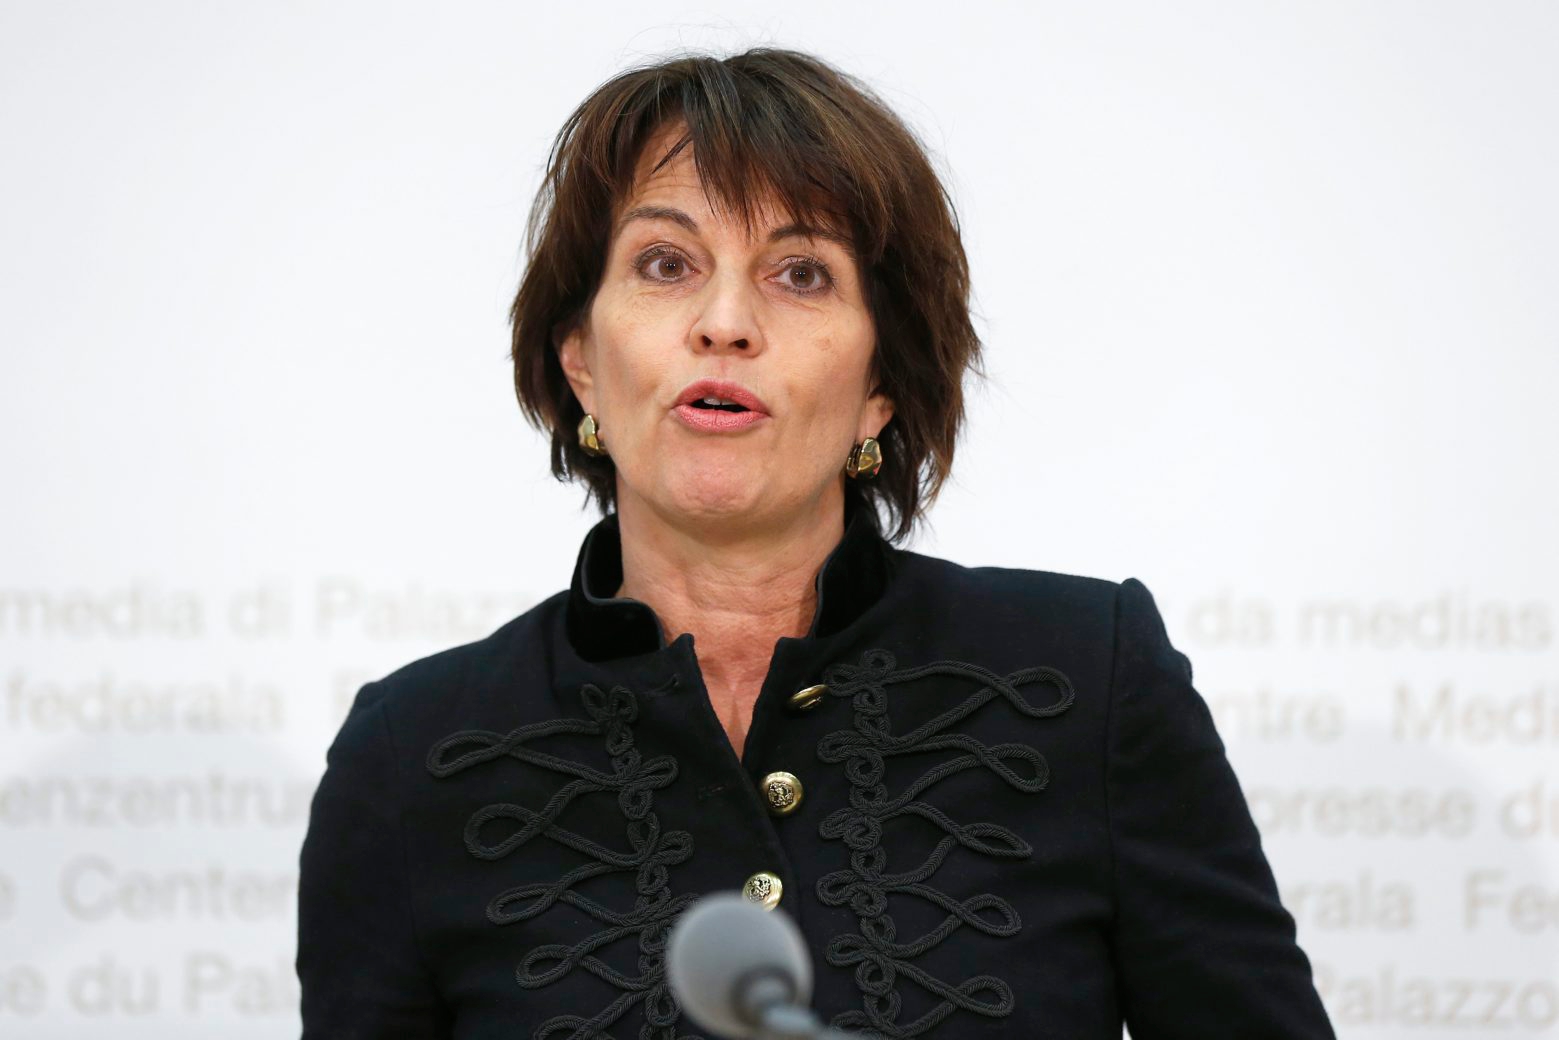 Swiss Federal President Doris Leuthard speaks during a press conference in Bern, Switzerland, Thursday, December 21, 2017. The European Commission approved the recognition of equivalence for the Swiss Stock Exchange, but only for one year. In response, the Swiss Federal Council is considerig the abolition of the stamp tax in order to strengthen the Swiss stock market. (KEYSTONE/Peter Klaunzer) SWITZERLAND EU STOCK MARKET RECOGNITION